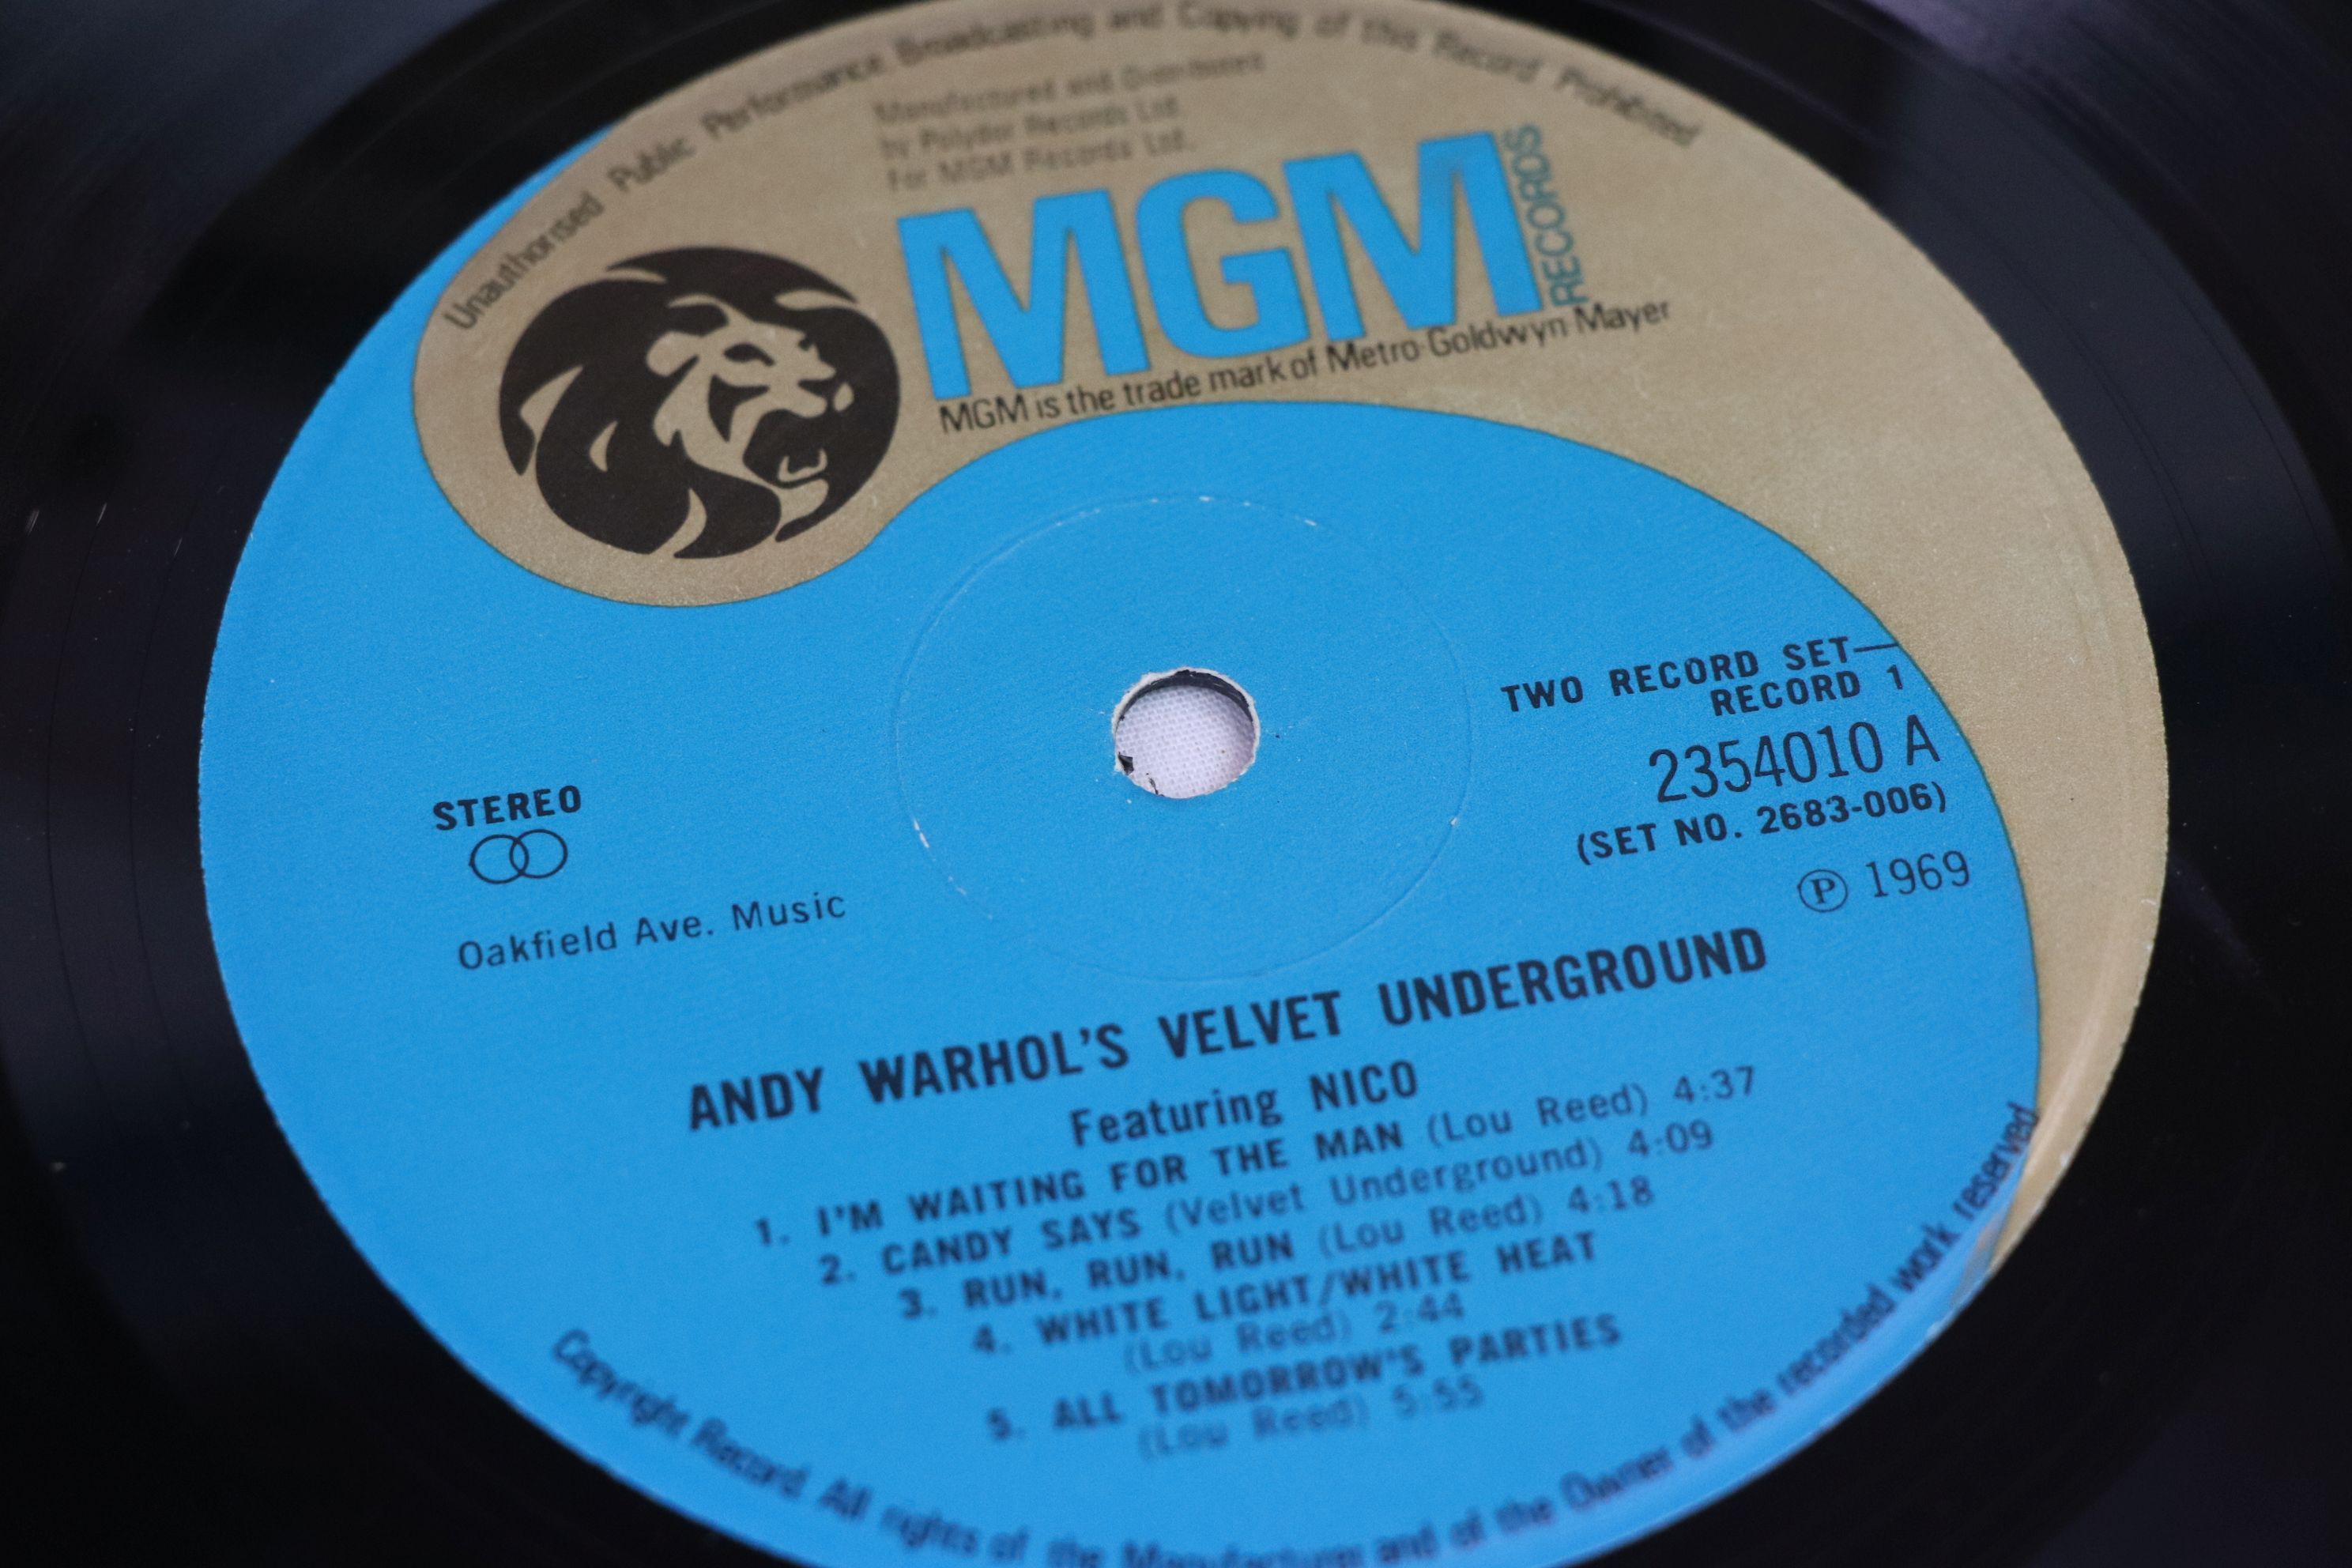 Vinyl - Andy Warhol's Velvet Underground Featuring Nico Double LP 1st press release on MGM Select - Image 7 of 8